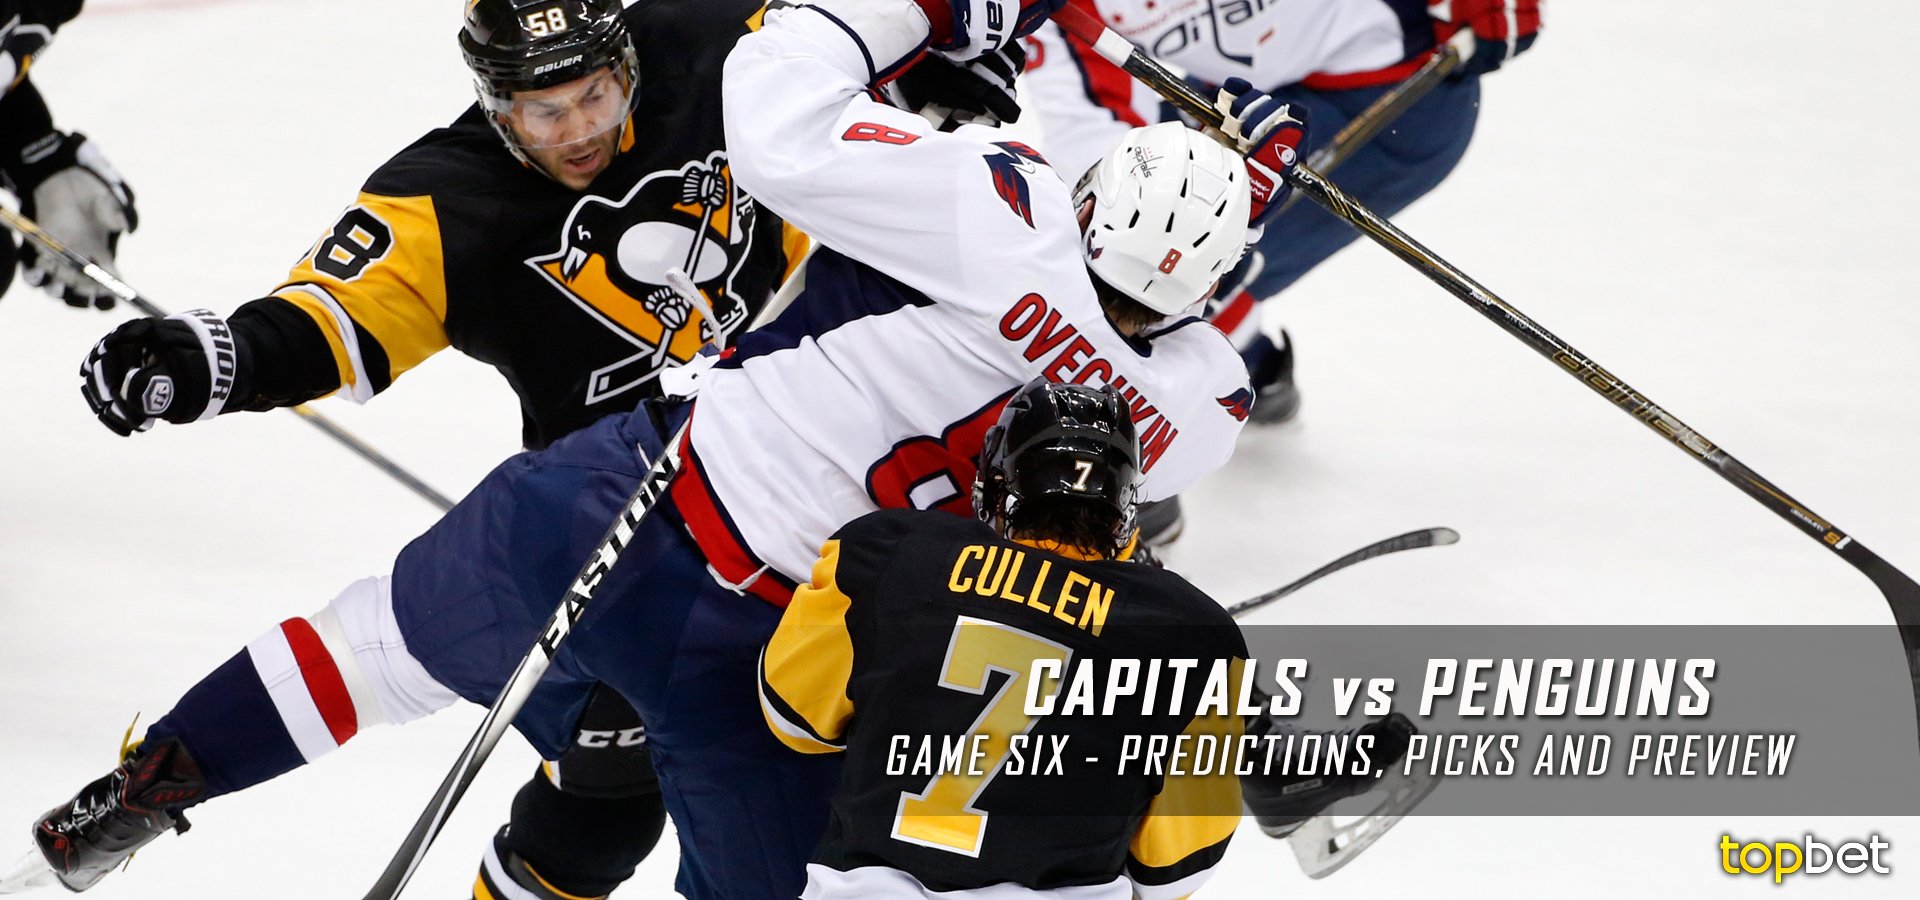 Capitals vs Penguins Series Game 6 Predictions, Picks and Odds